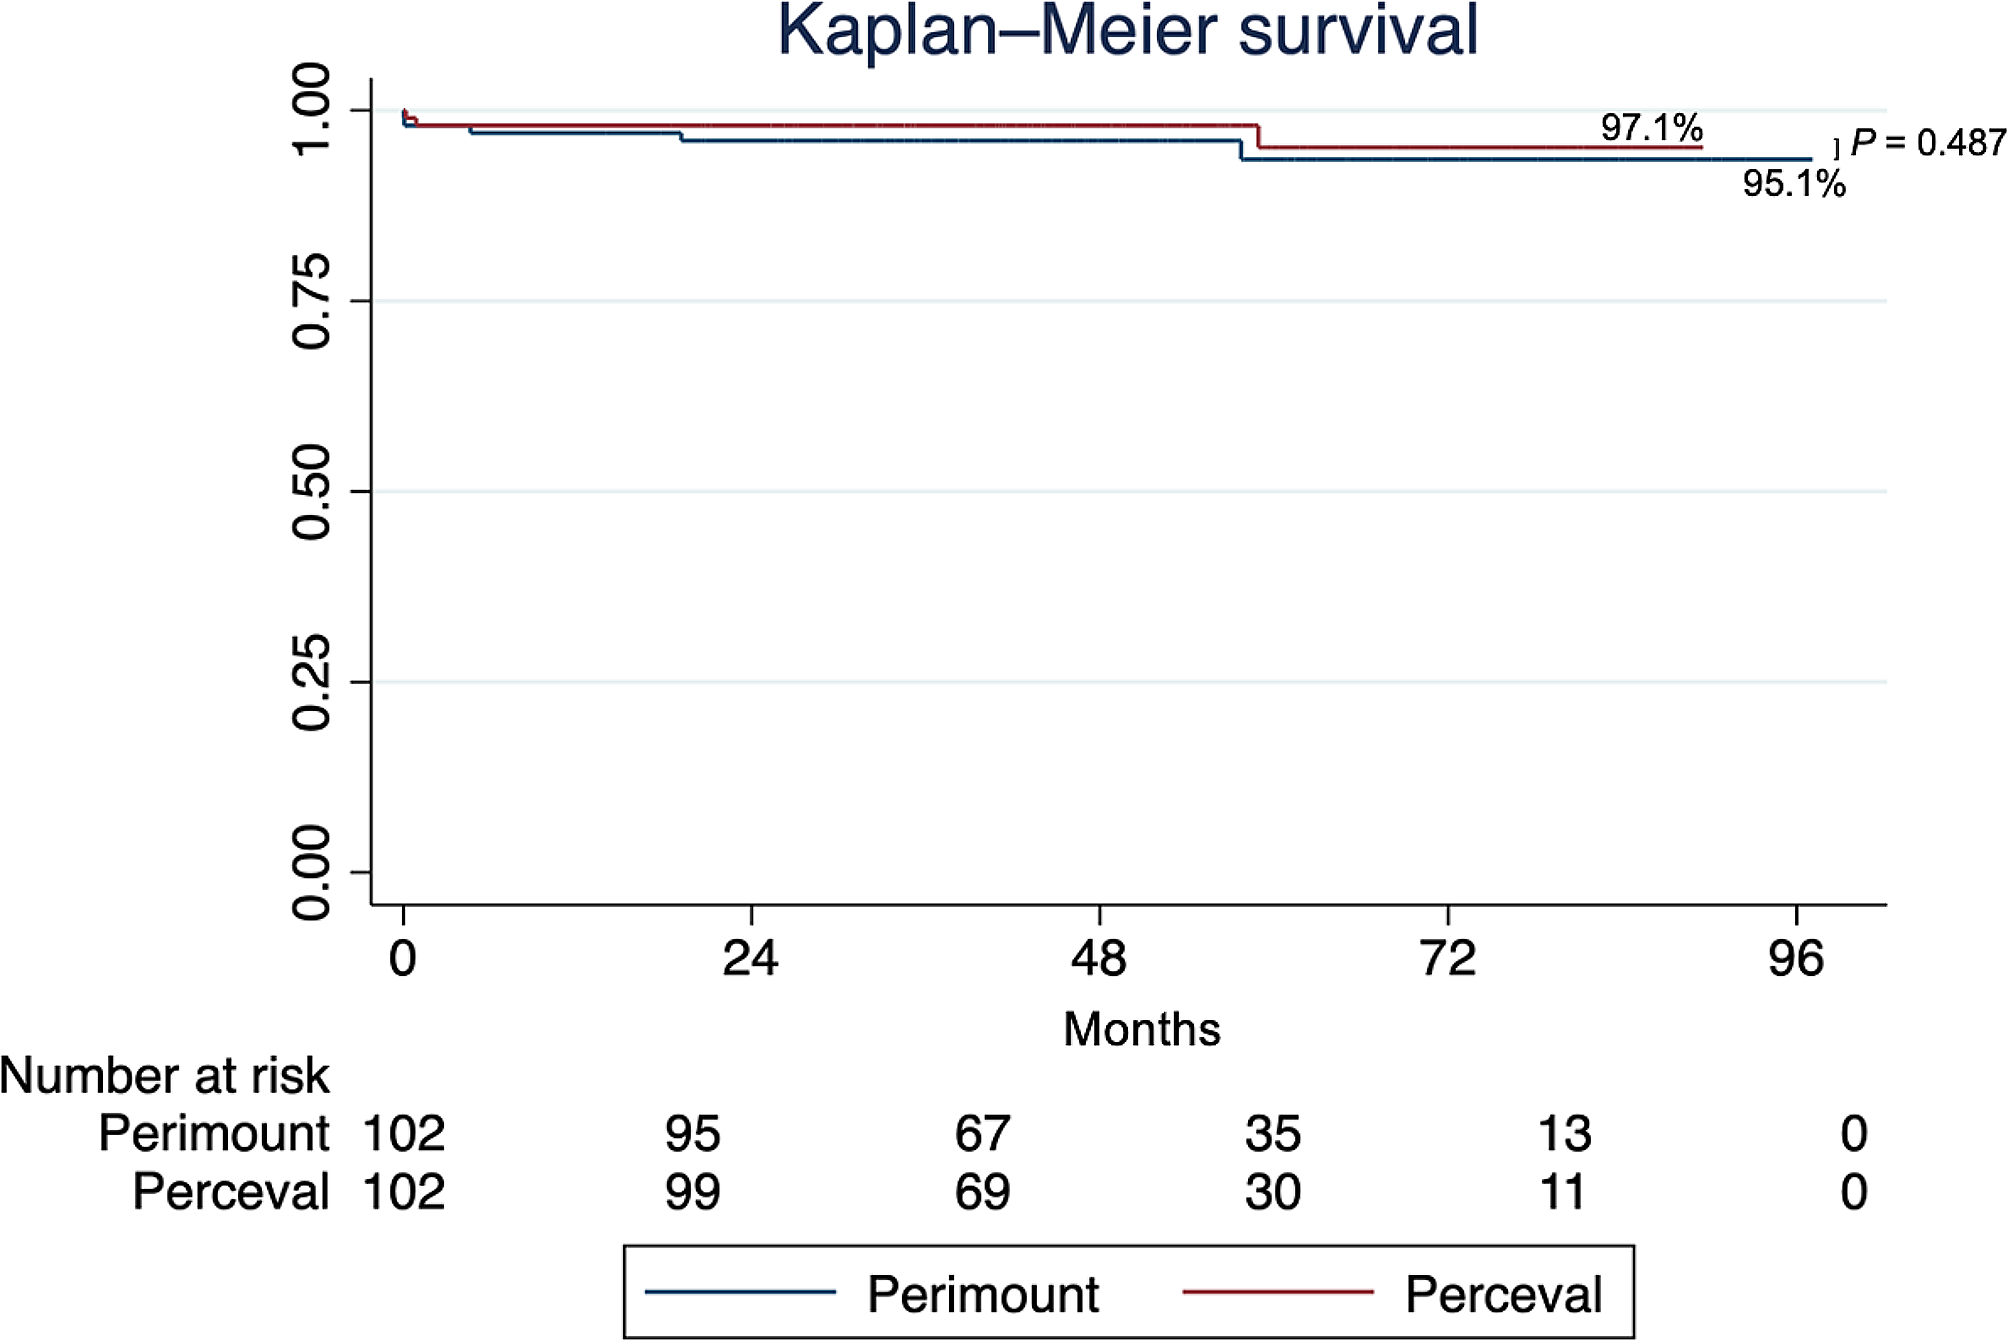 Perceval sutureless bioprosthesis versus Perimount sutured bioprosthesis for aortic valve replacement in patients with aortic stenosis: a retrospective, propensity-matched study